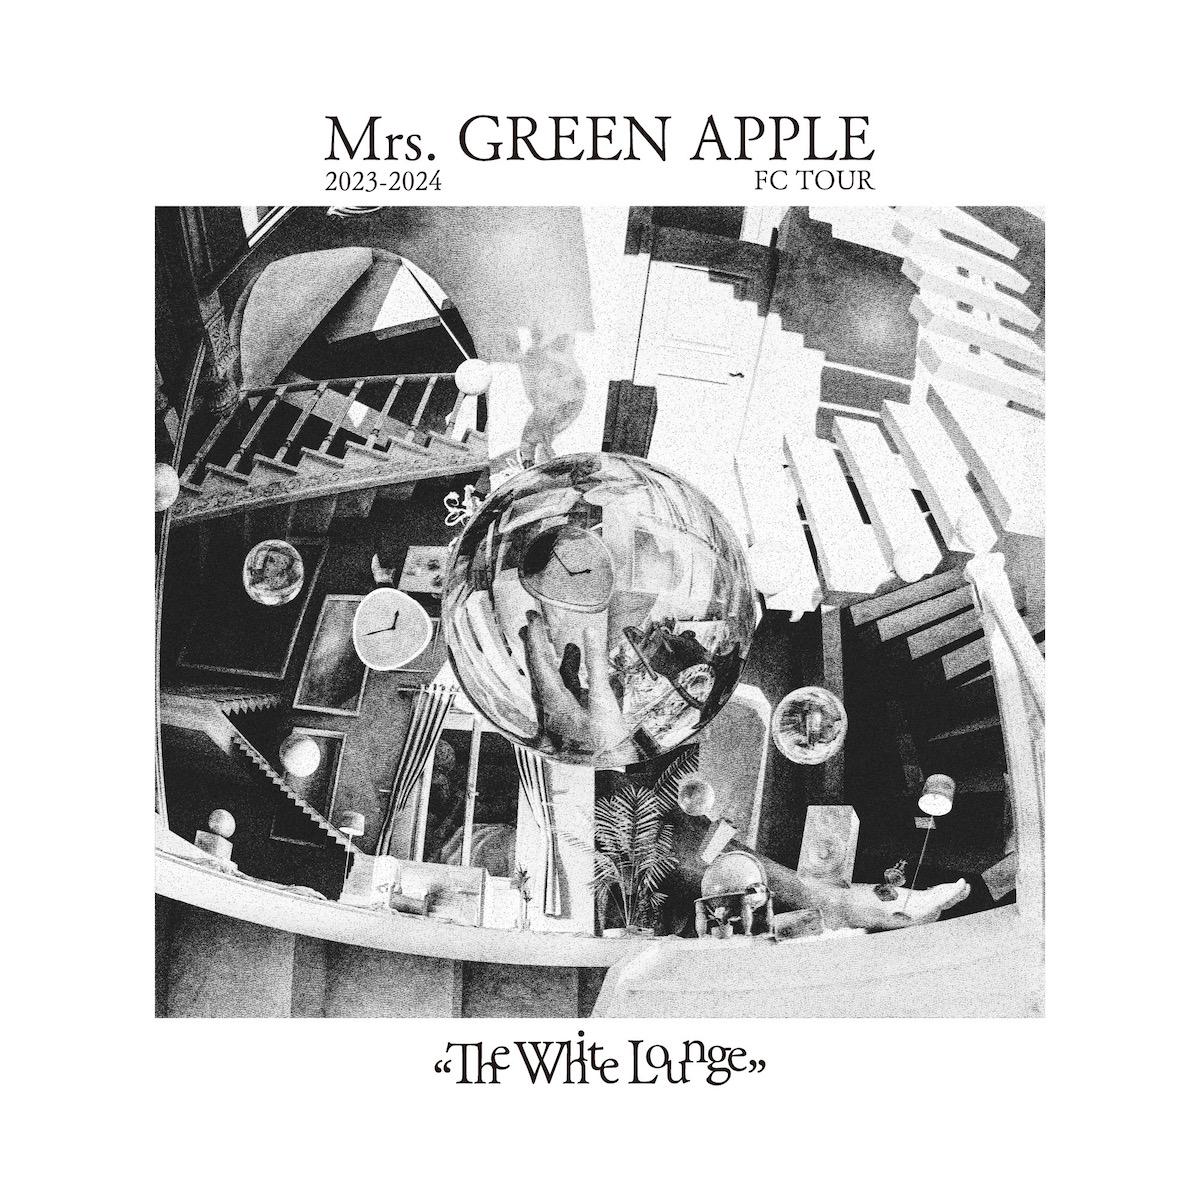 MGAMrs. GREEN APPLE 2023 COMPLETE BOX